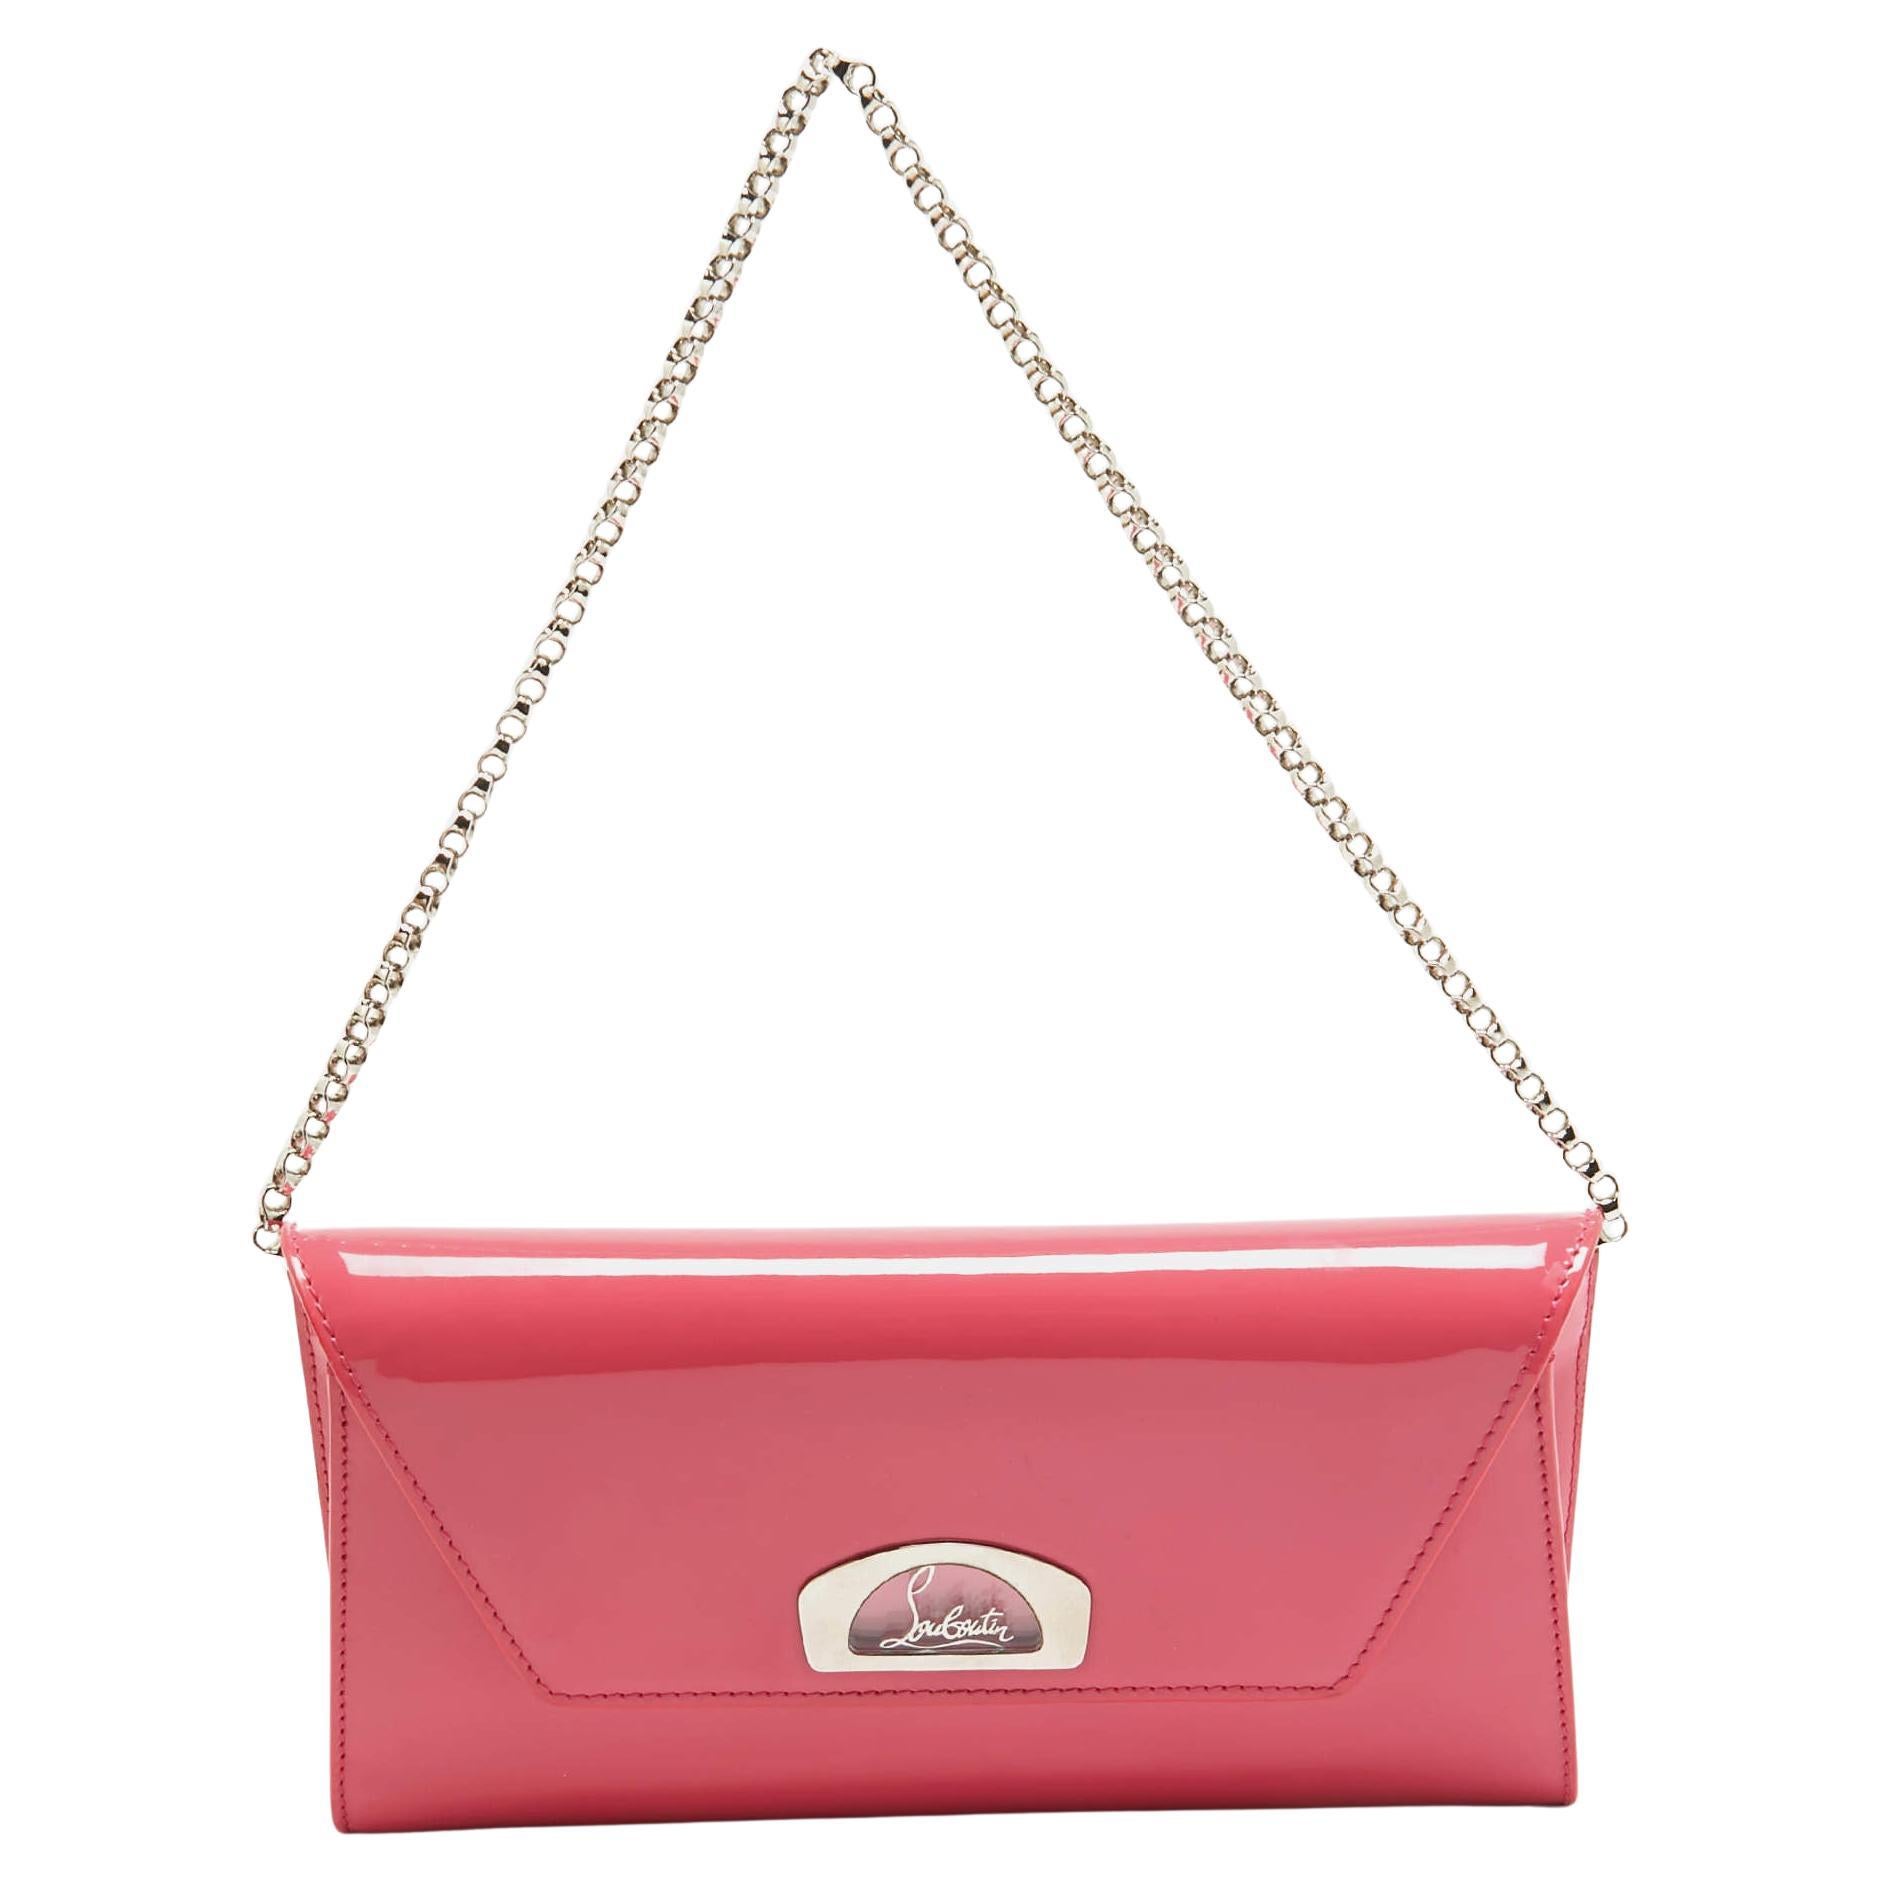 Christian Louboutin Pink Patent Leather Vero Dodat Chain Clutch For Sale